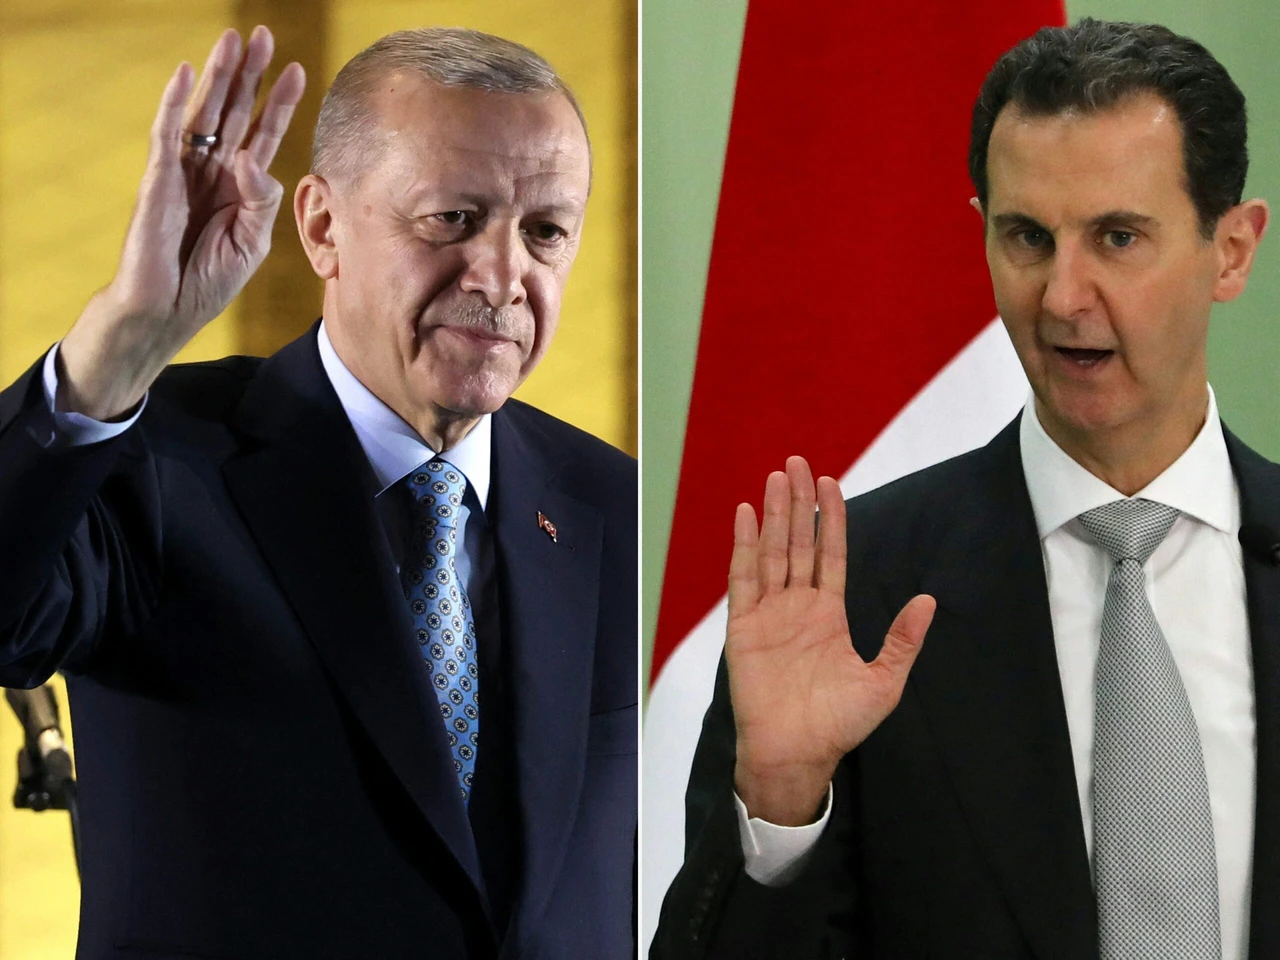 Syria's Assad open to talks with Erdogan, stresses key conditions